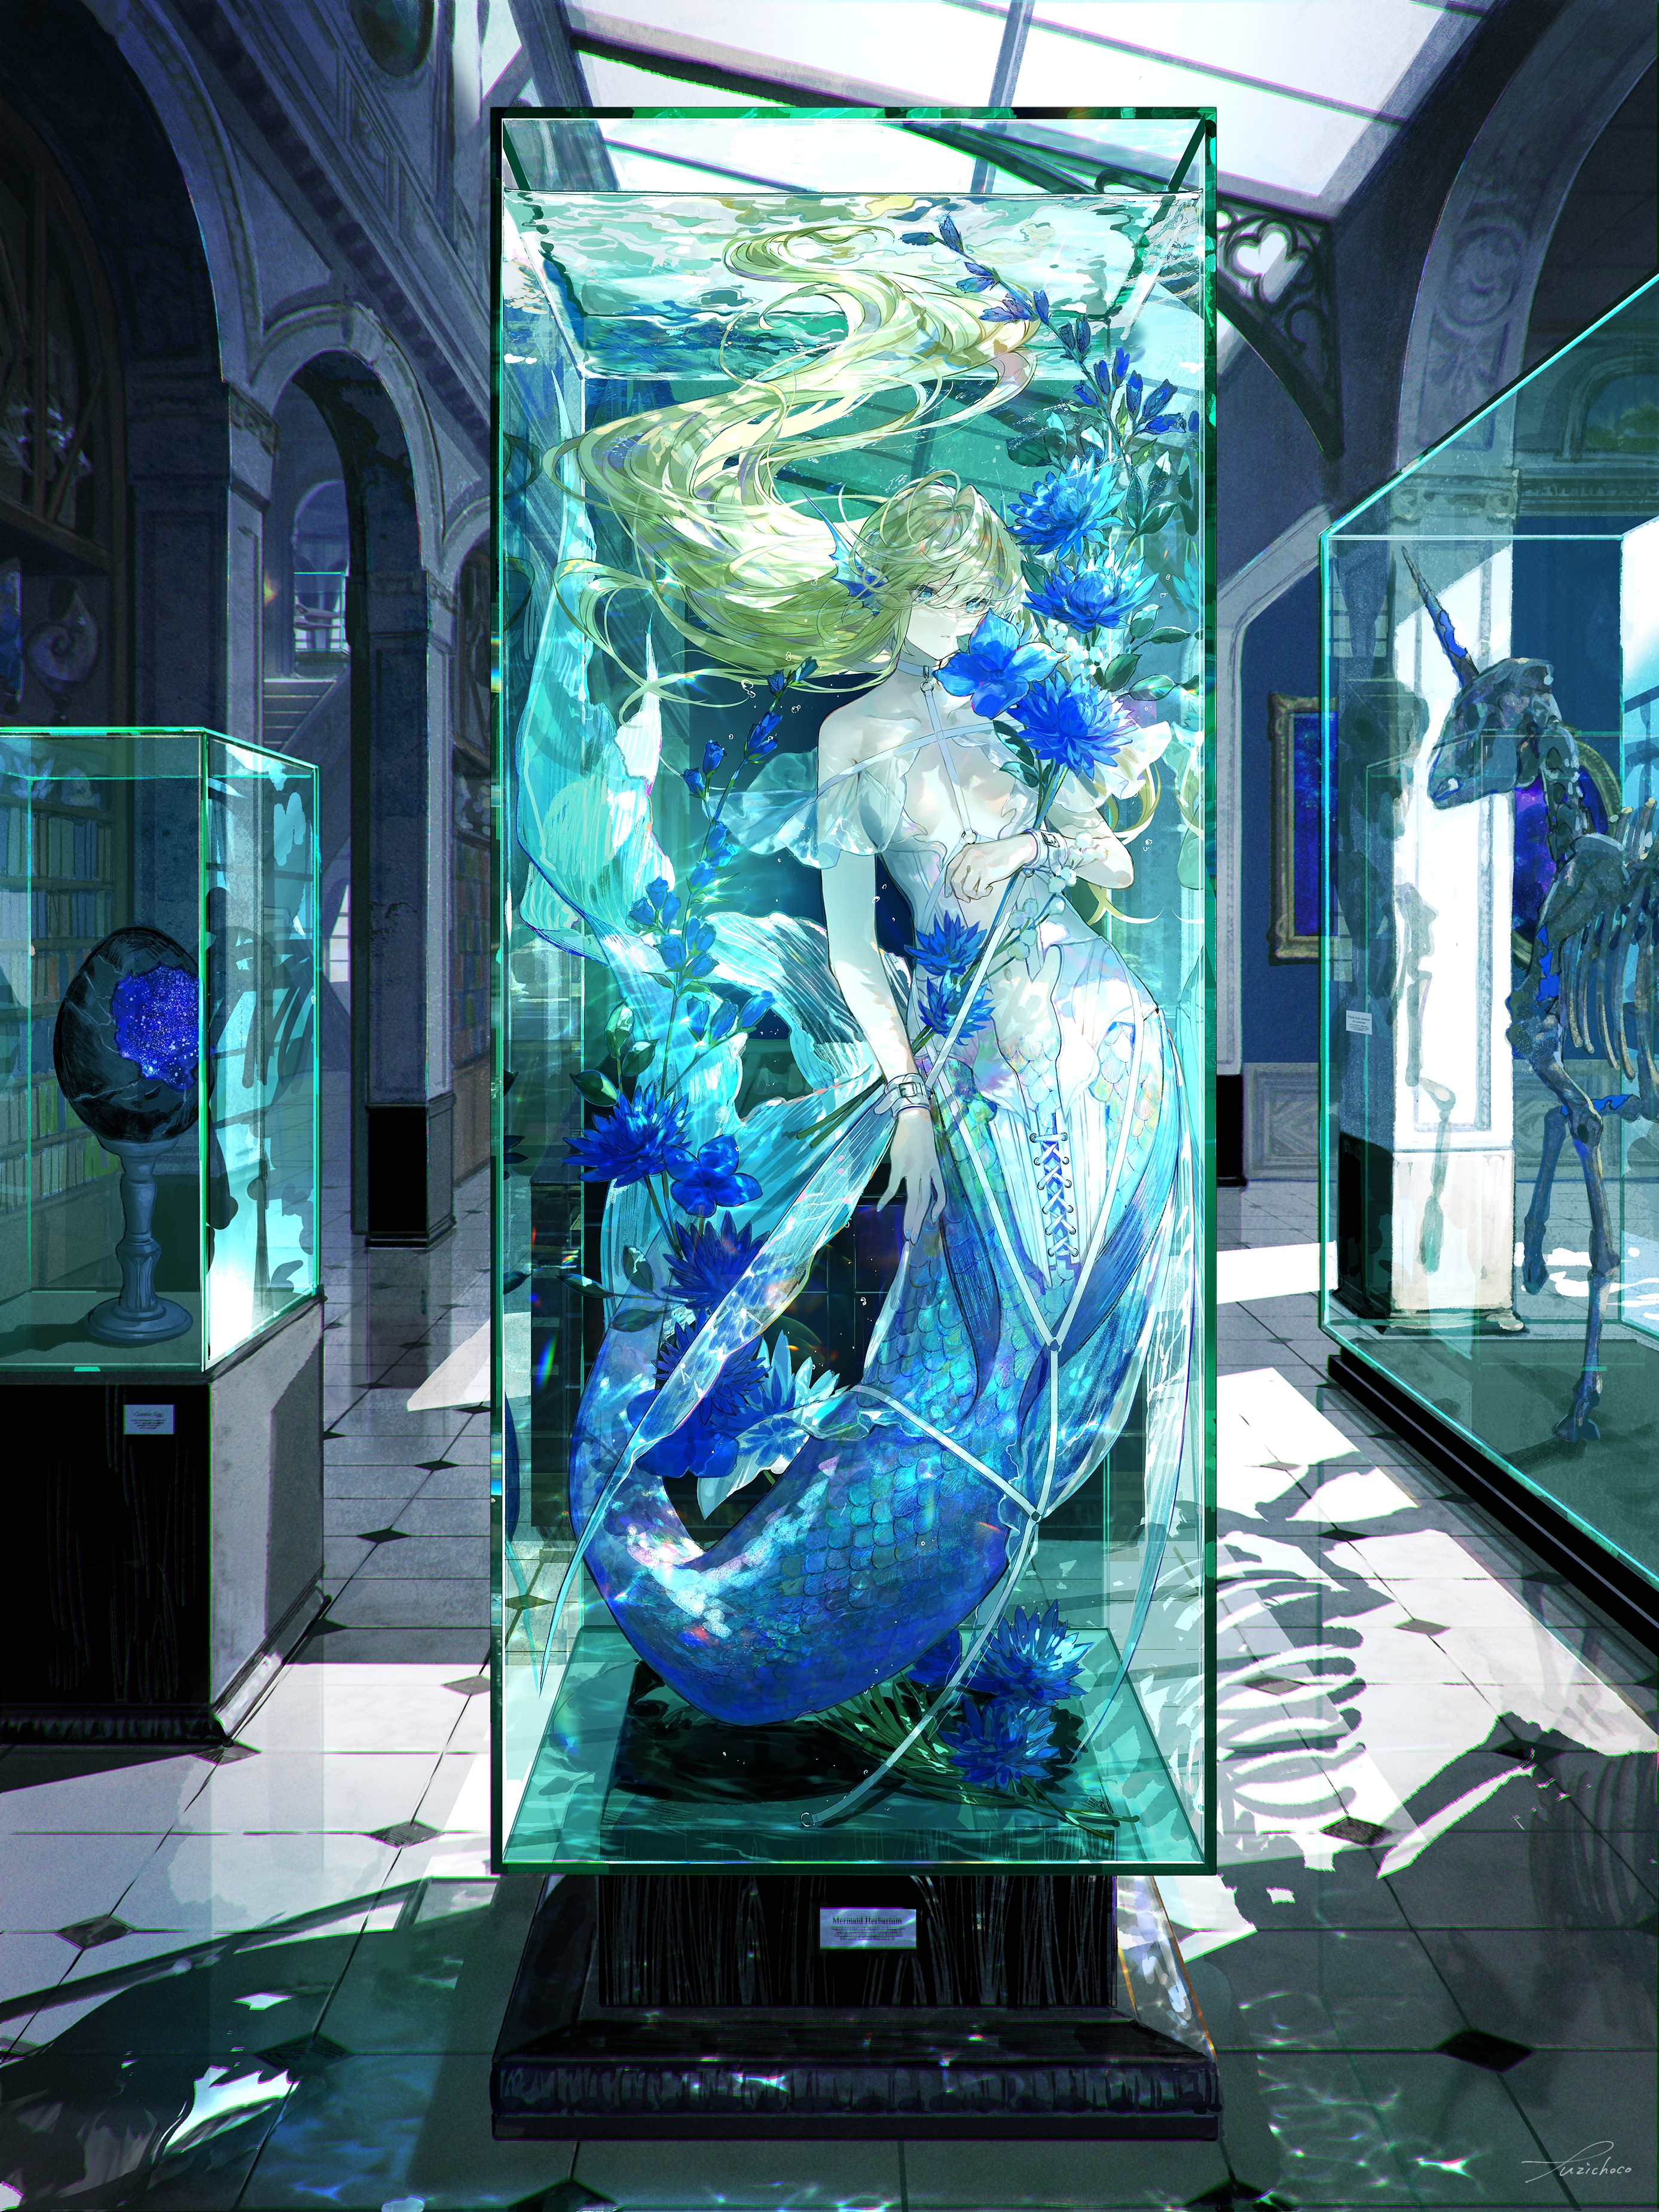 Anime 2775x3700 Fuji Choko anime anime girls Pixiv mermaids scales flowers museum portrait display skeleton hair in face in water underwater parted lips wrist cuffs handcuffed blue eyes blonde original characters water fish tank picture frames dress skinny frills arch plants unicorn dahlias